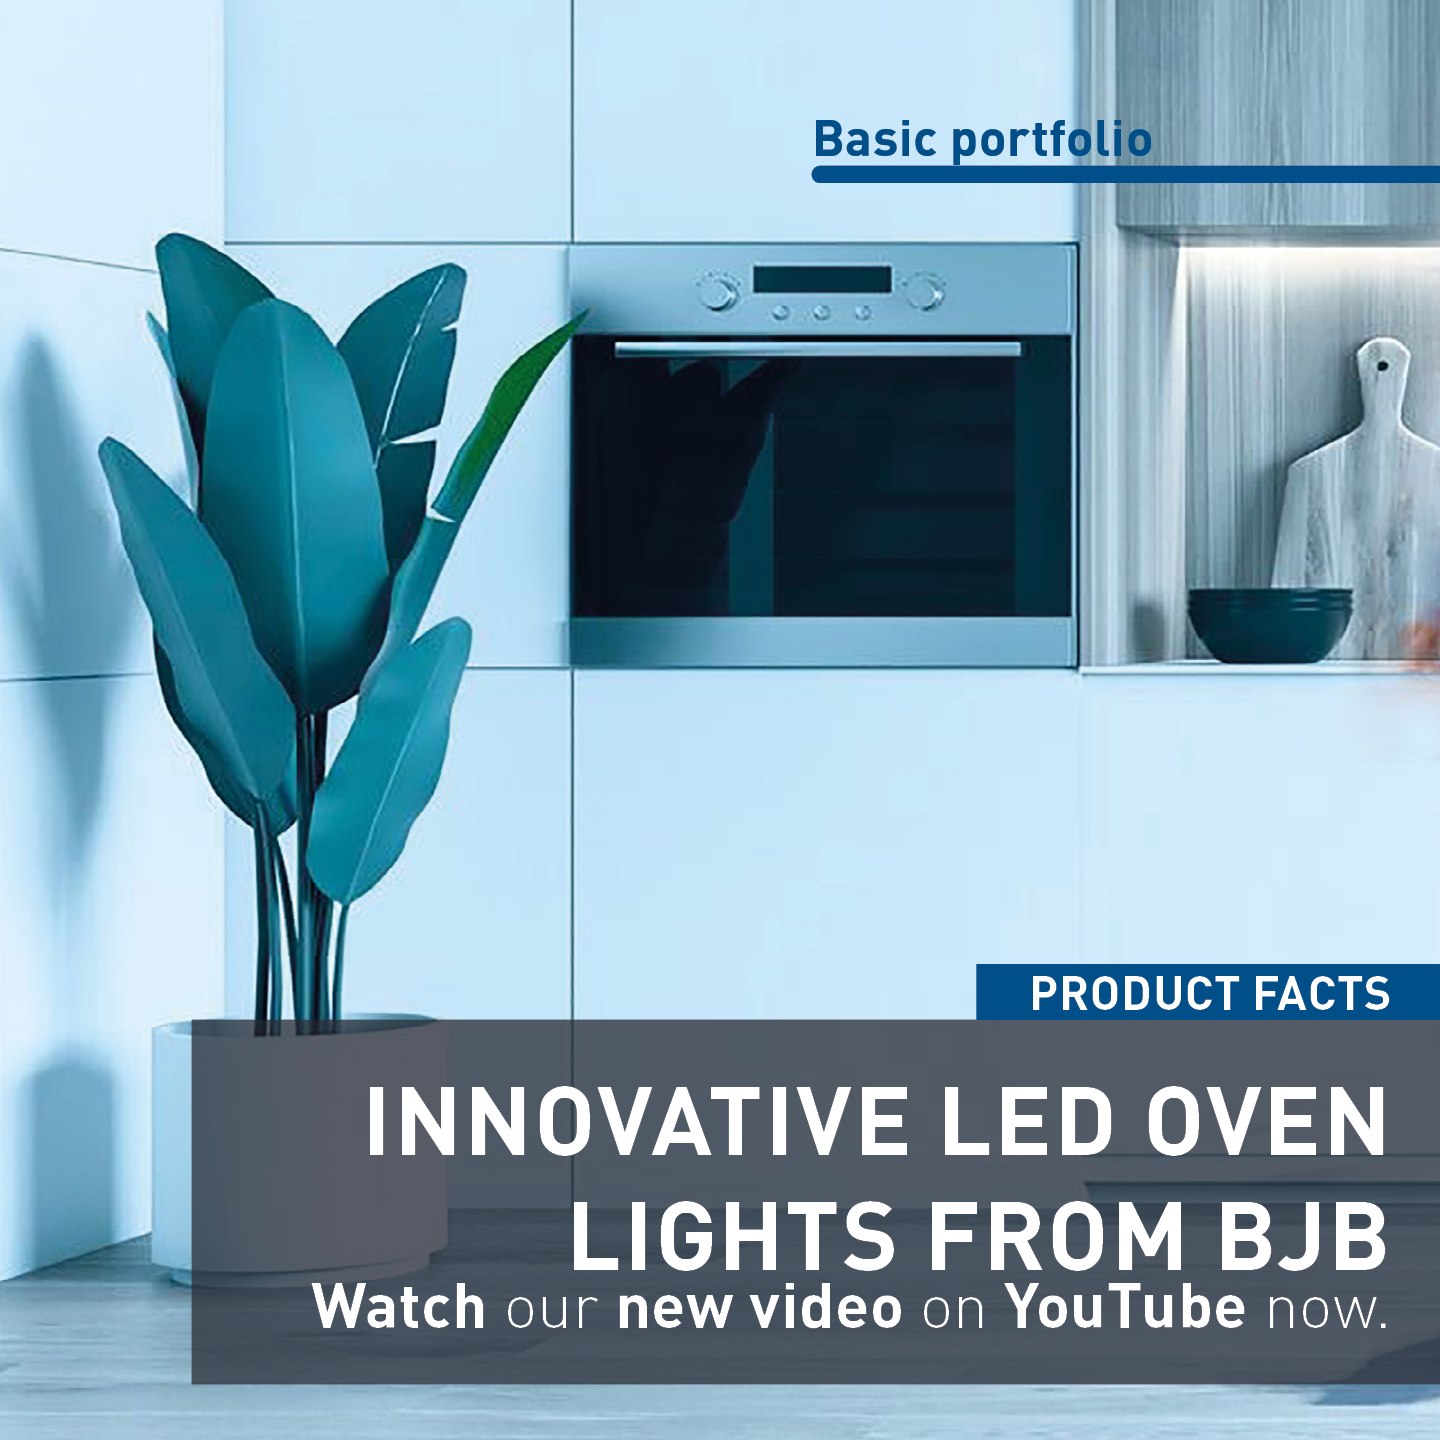 🌟 Introducing BJB LED Oven Lights - Lighting Solutions for Every Appliance! 🌟

Discover BJB&#039;s versatile LED oven lights, perfect for ovens, microwaves, and steam cookers! 💡 Our energy-saving multi-talents take appliance lighting to the next level.

With BJB LED oven lights, experience state-of-the-art lighting solutions designed for maximum versatility. 💪 From steam-tight to pyrolysis-compatible options, we&#039;ve got you covered for any setup. Installation is a breeze, whether it&#039;s side-mounted or ceiling-mounted.

Curious to learn more? Check out our latest YouTube video on our channel for an in-depth look at our LED oven lights and their features. .📹 Don&#039;t miss out on the innovation - watch now!

Watch the video here: https://www.youtube.com/watch?v=SPTagGSml0k&amp;t=8s

#BJB #ApplianceLighting #LEDLights #LightingSolutions #Innovation #KitchenAppliances #YouTube #NewVideo #LEDovenlights #appliance #lightingsolutions #innovative #energyefficient #multilevelillumination #kitchenappliances #homeappliances #technology